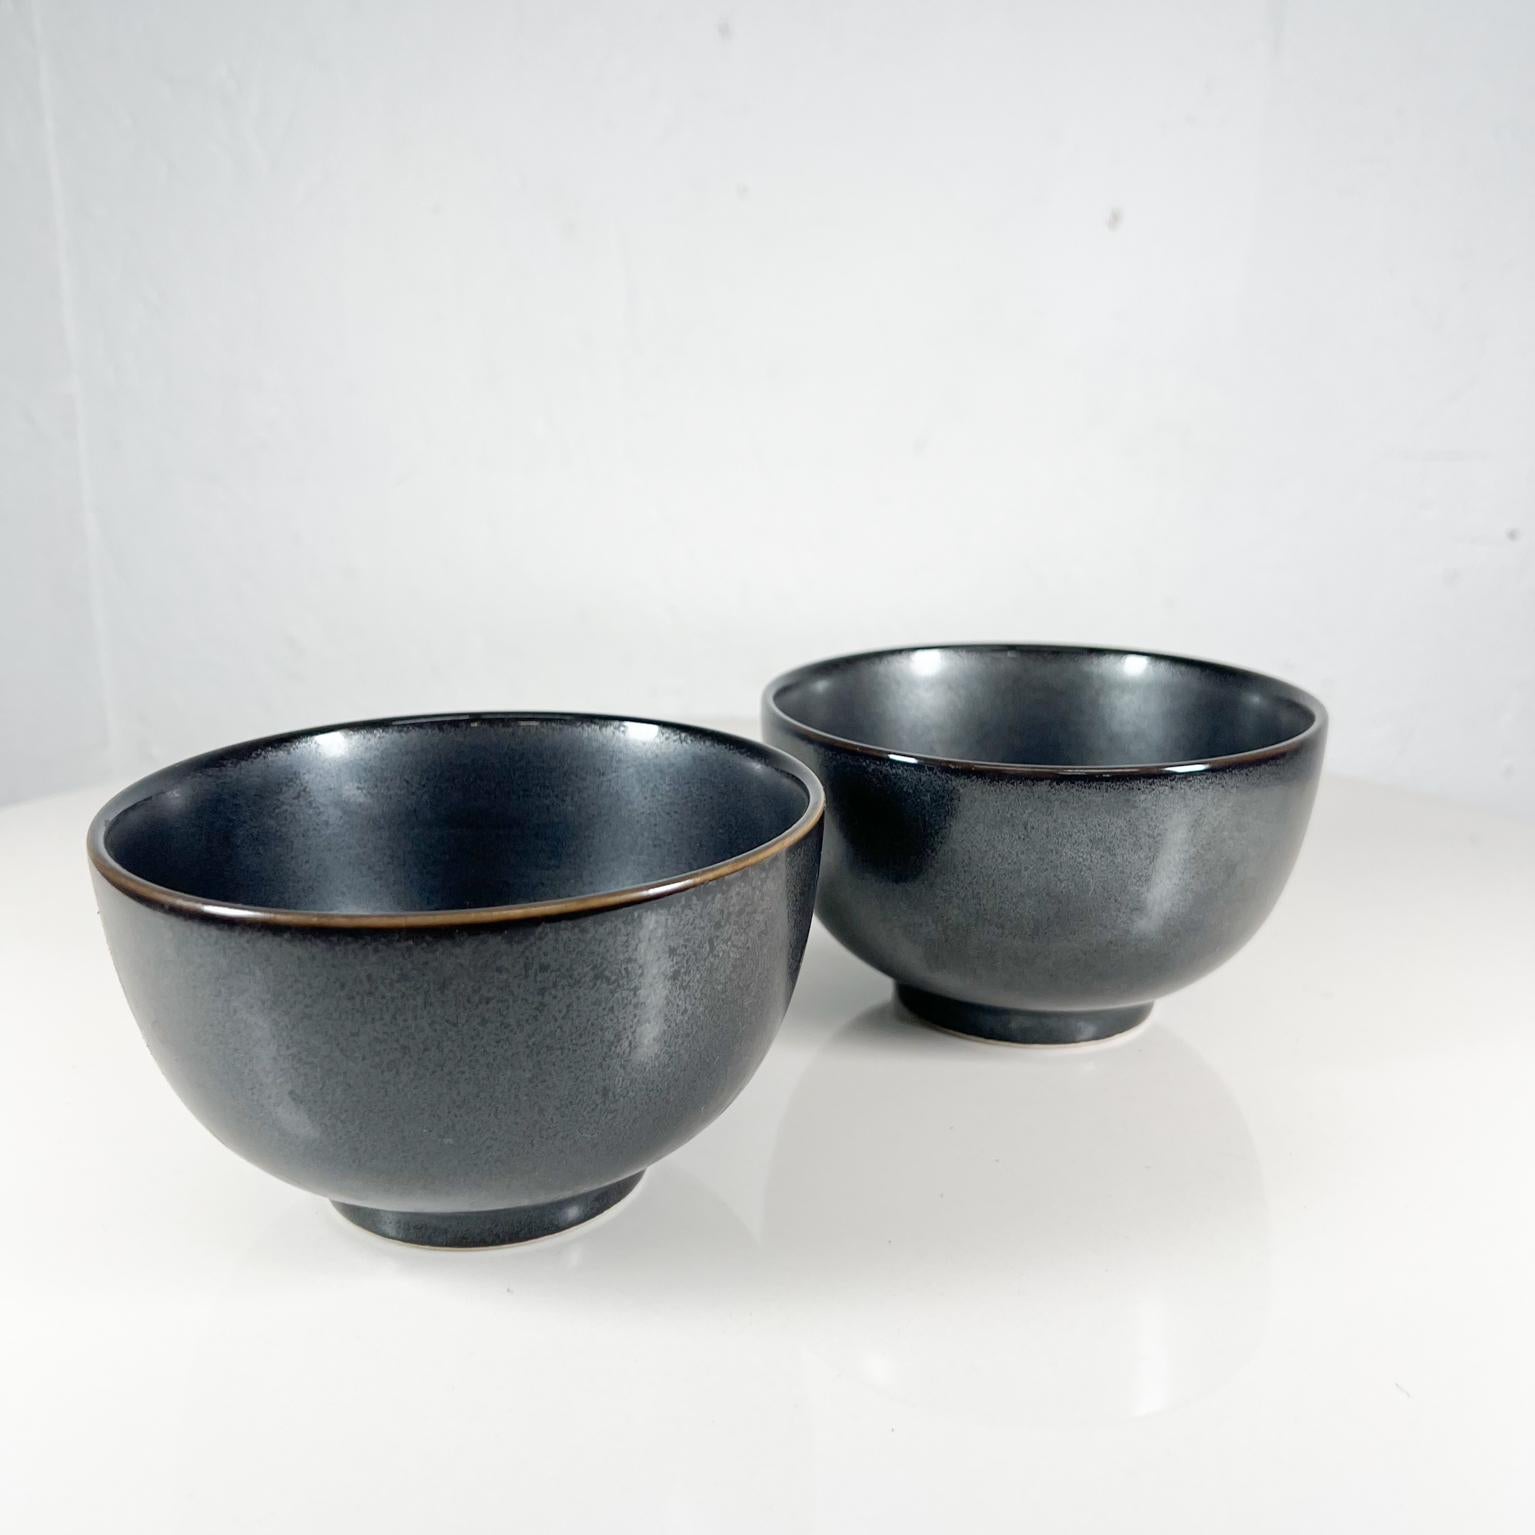 1960s set of two vintage black pottery cups small bowls from Japan.
Measures: 5 diameter x 3 tall.
Unrestored vintage condition preowned.
Refer to images.
 